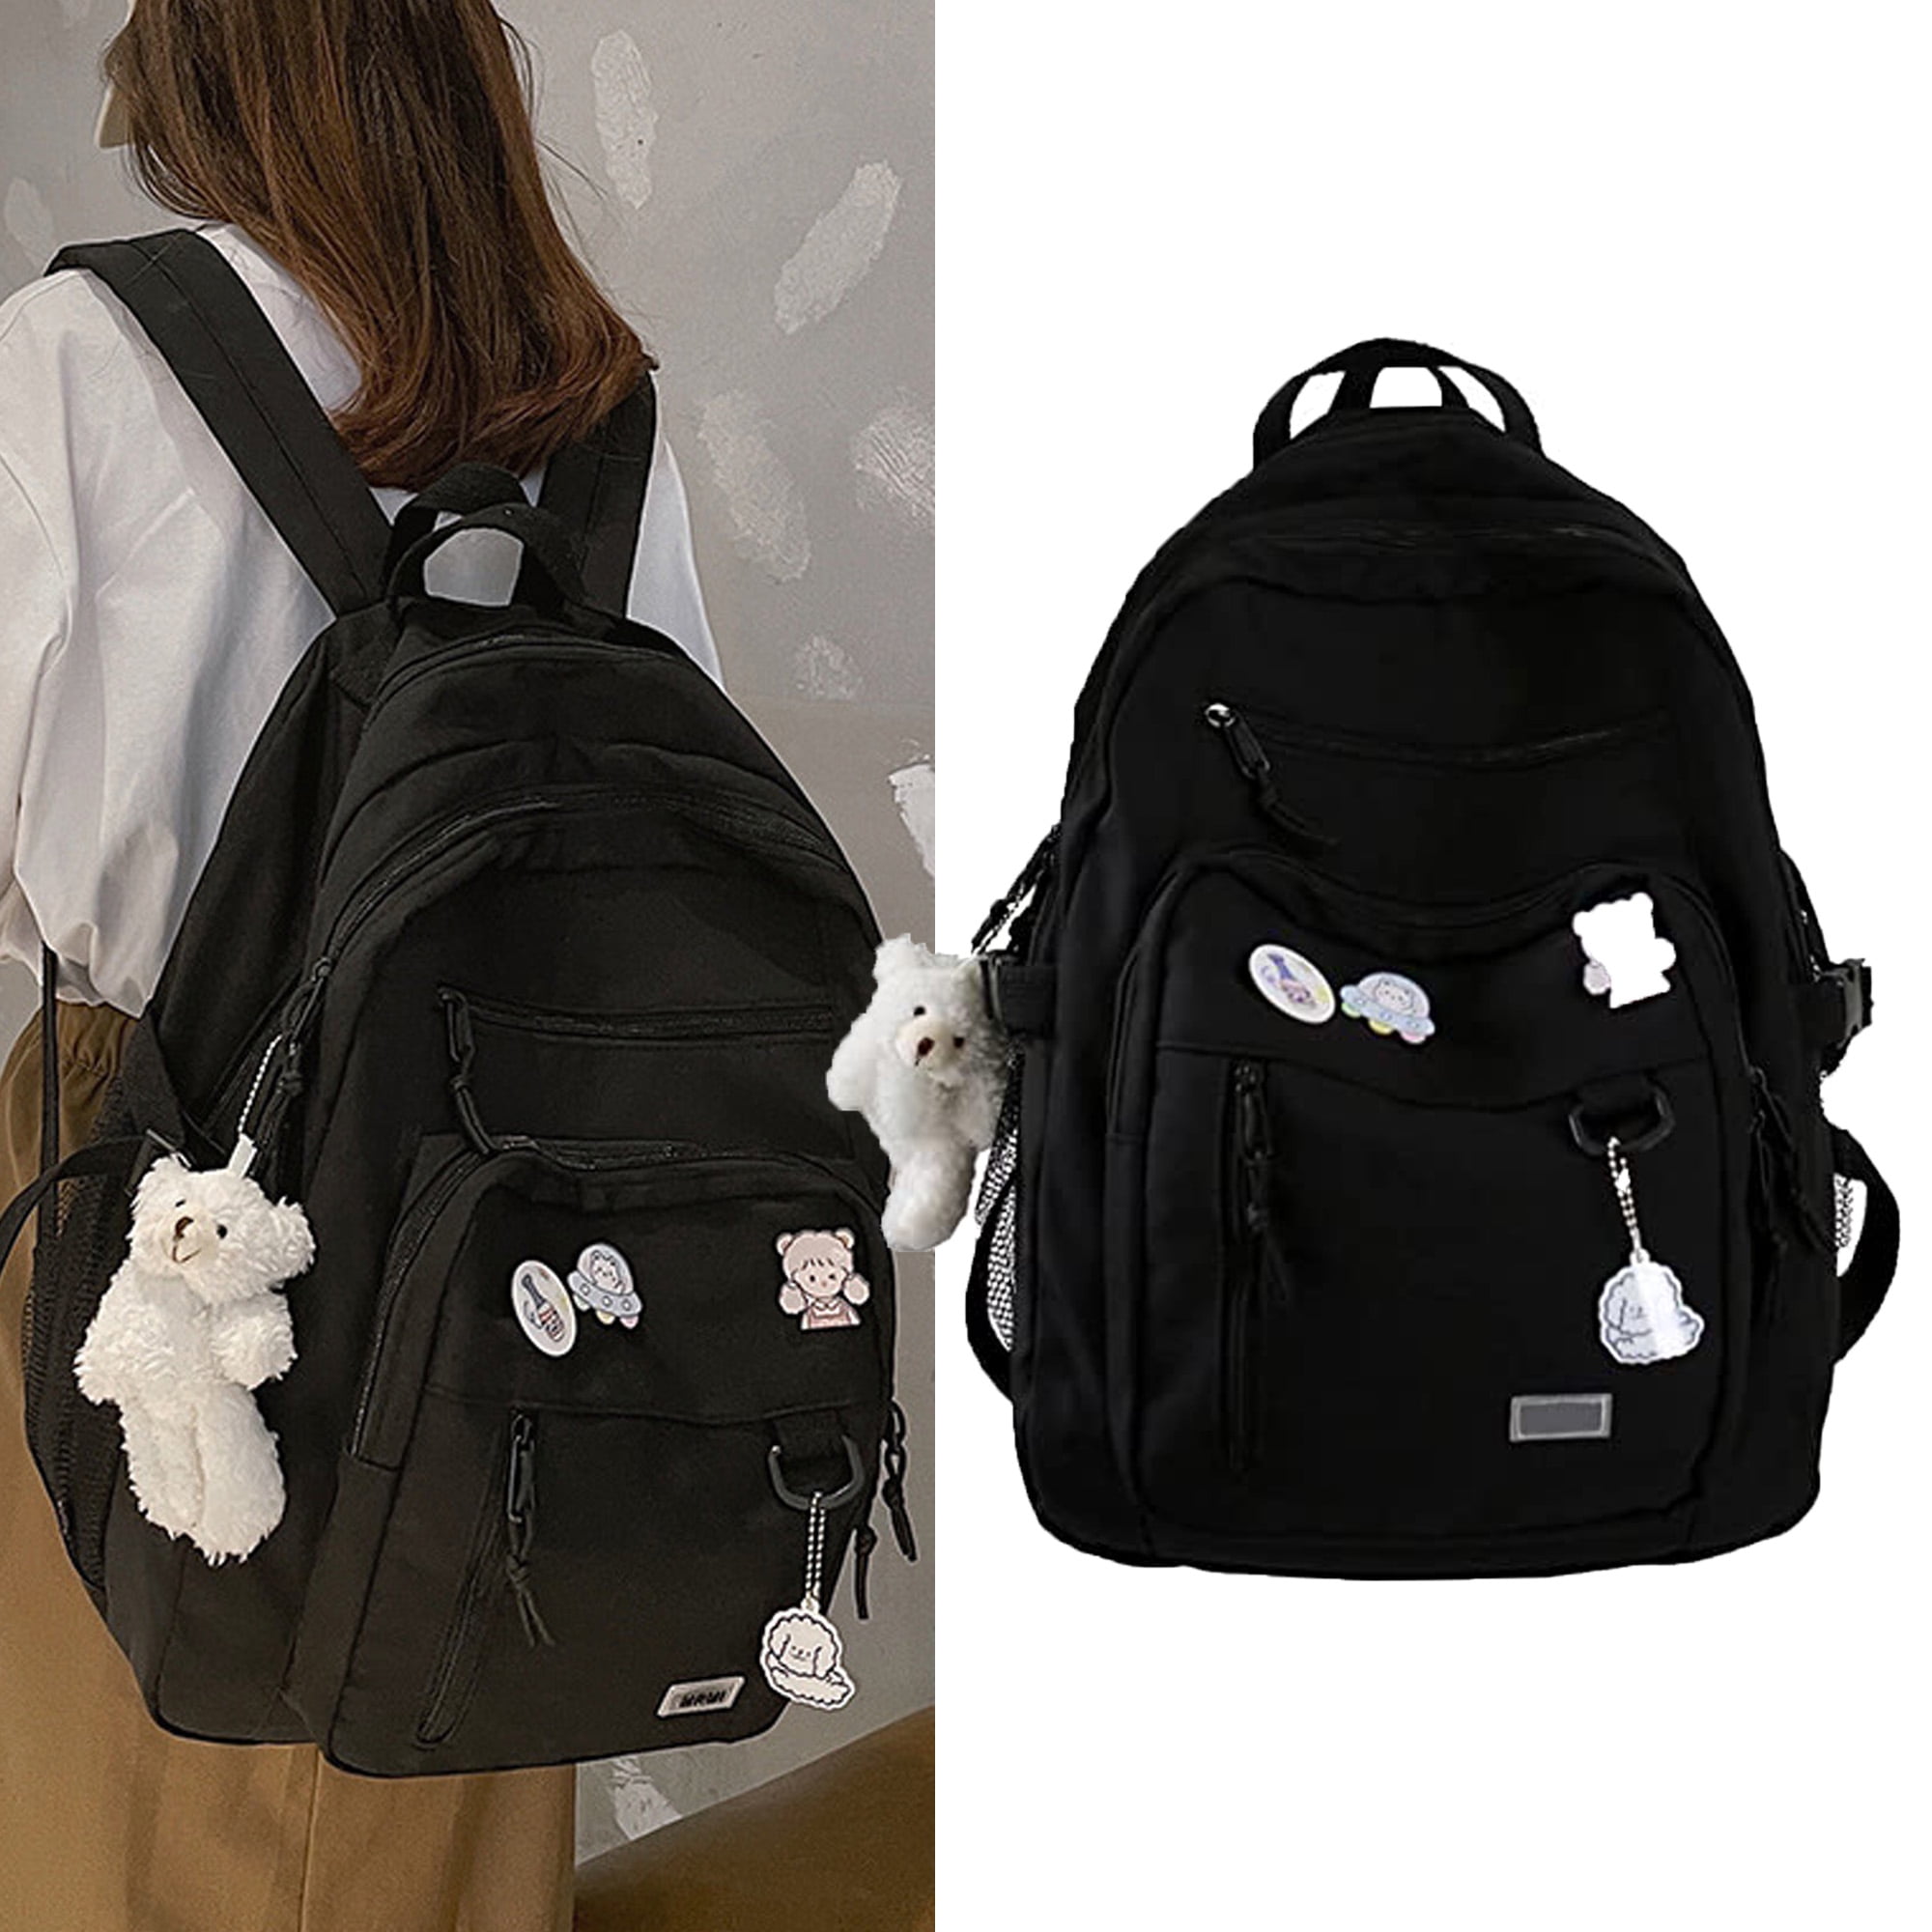 Cool Backpacks For High School | Touchy Style